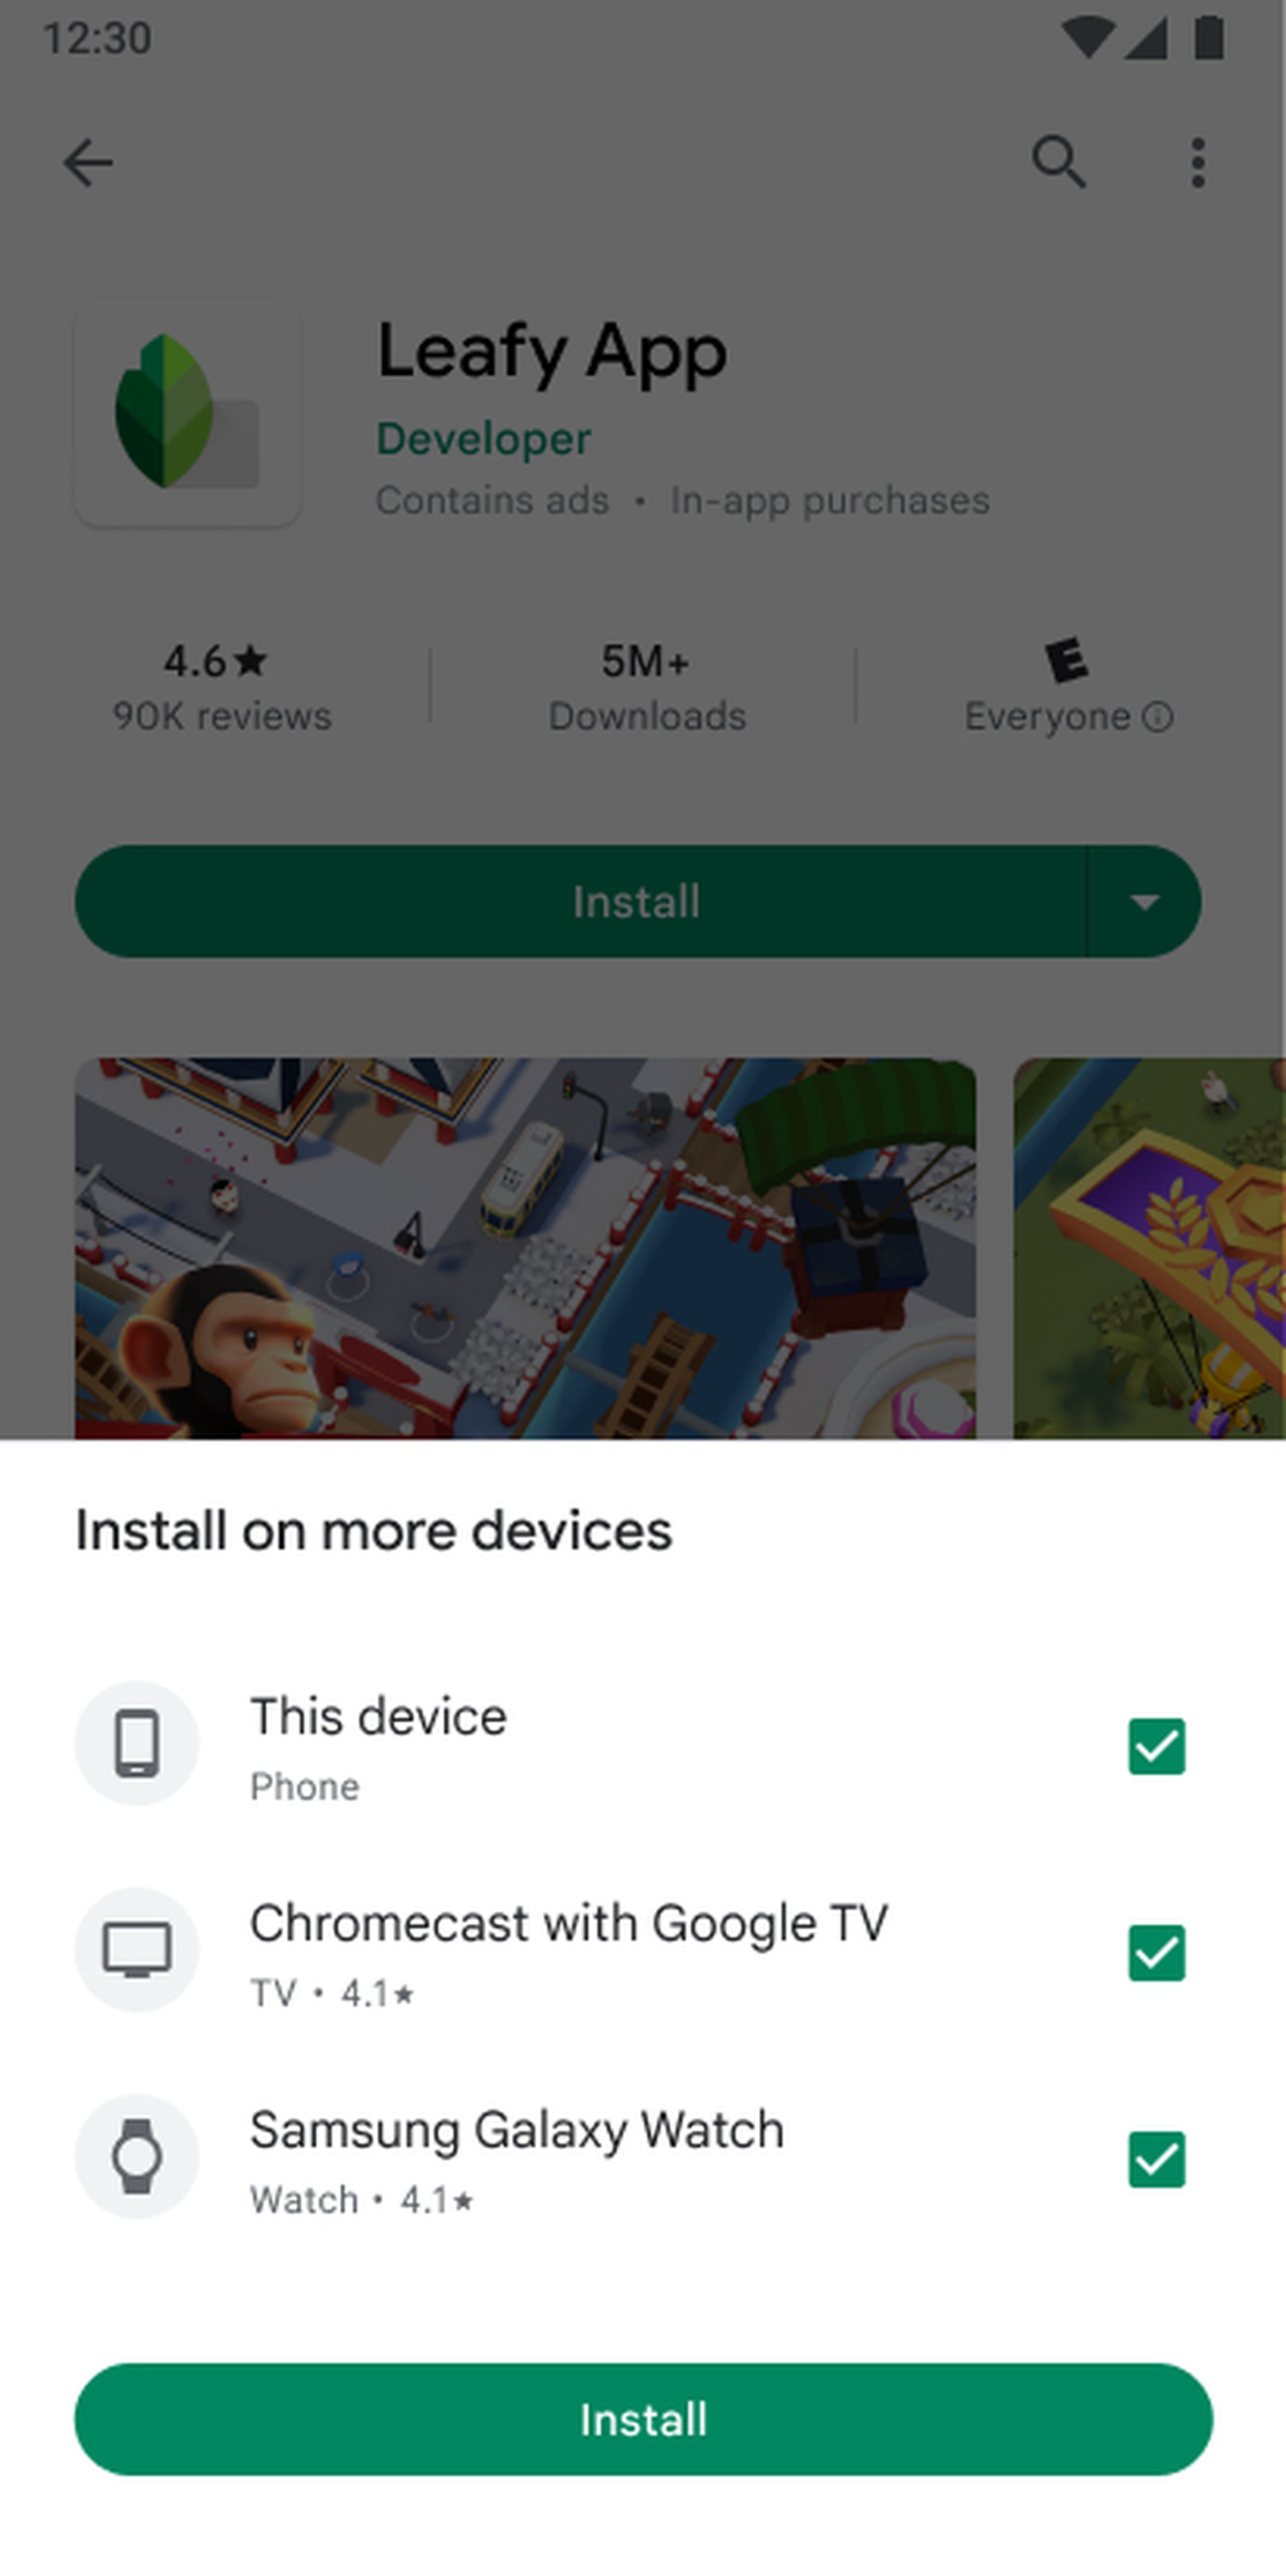 A screenshot showing one Google Play app being installed across multiple device types.